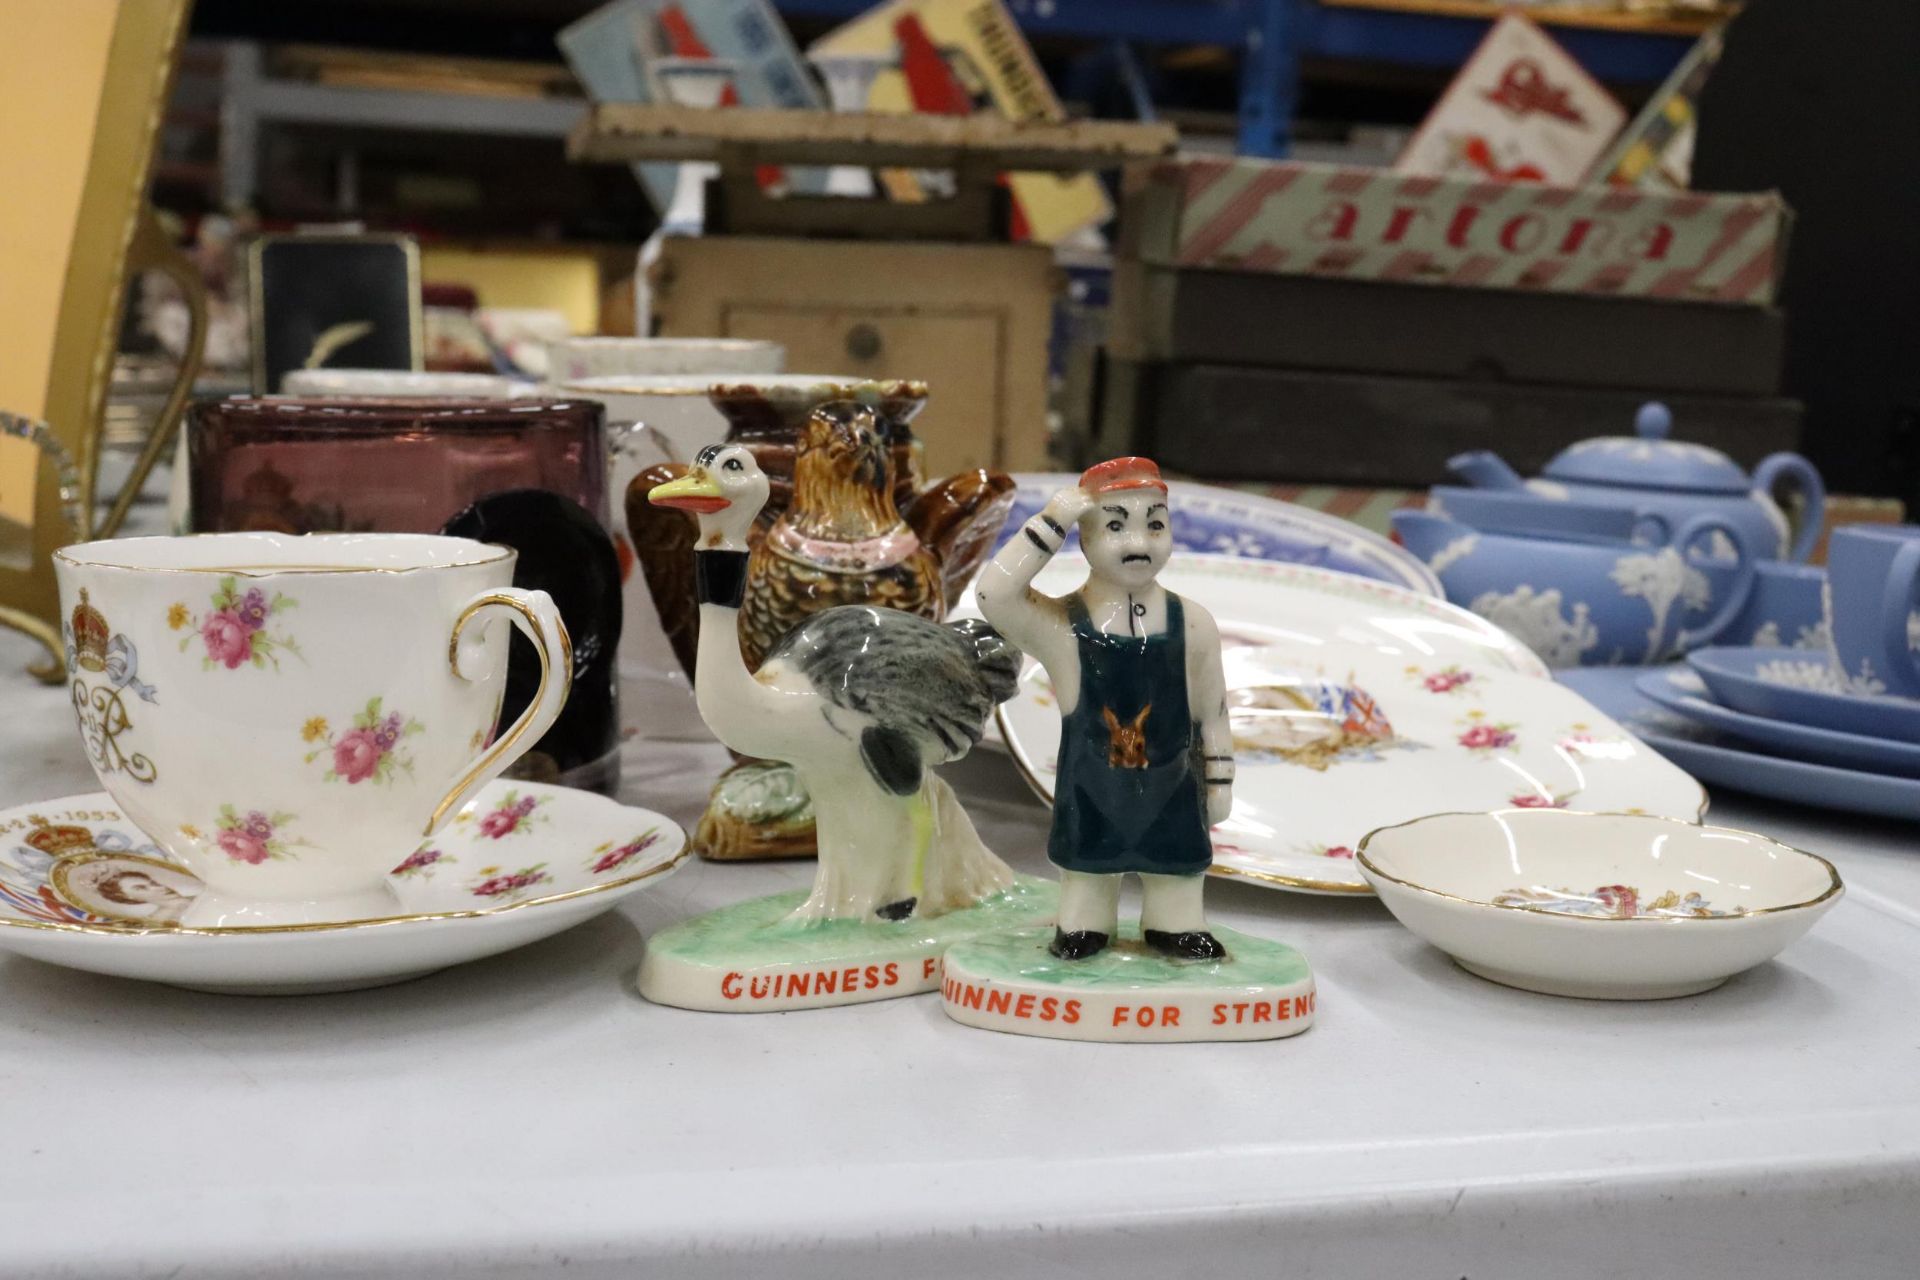 A COLLECTION OF ROYAL COMMEMORATIVE ITEMS TO INCLUDE CUPS, PLATES, PLUS GUINNESS CERAMICS - Image 5 of 11